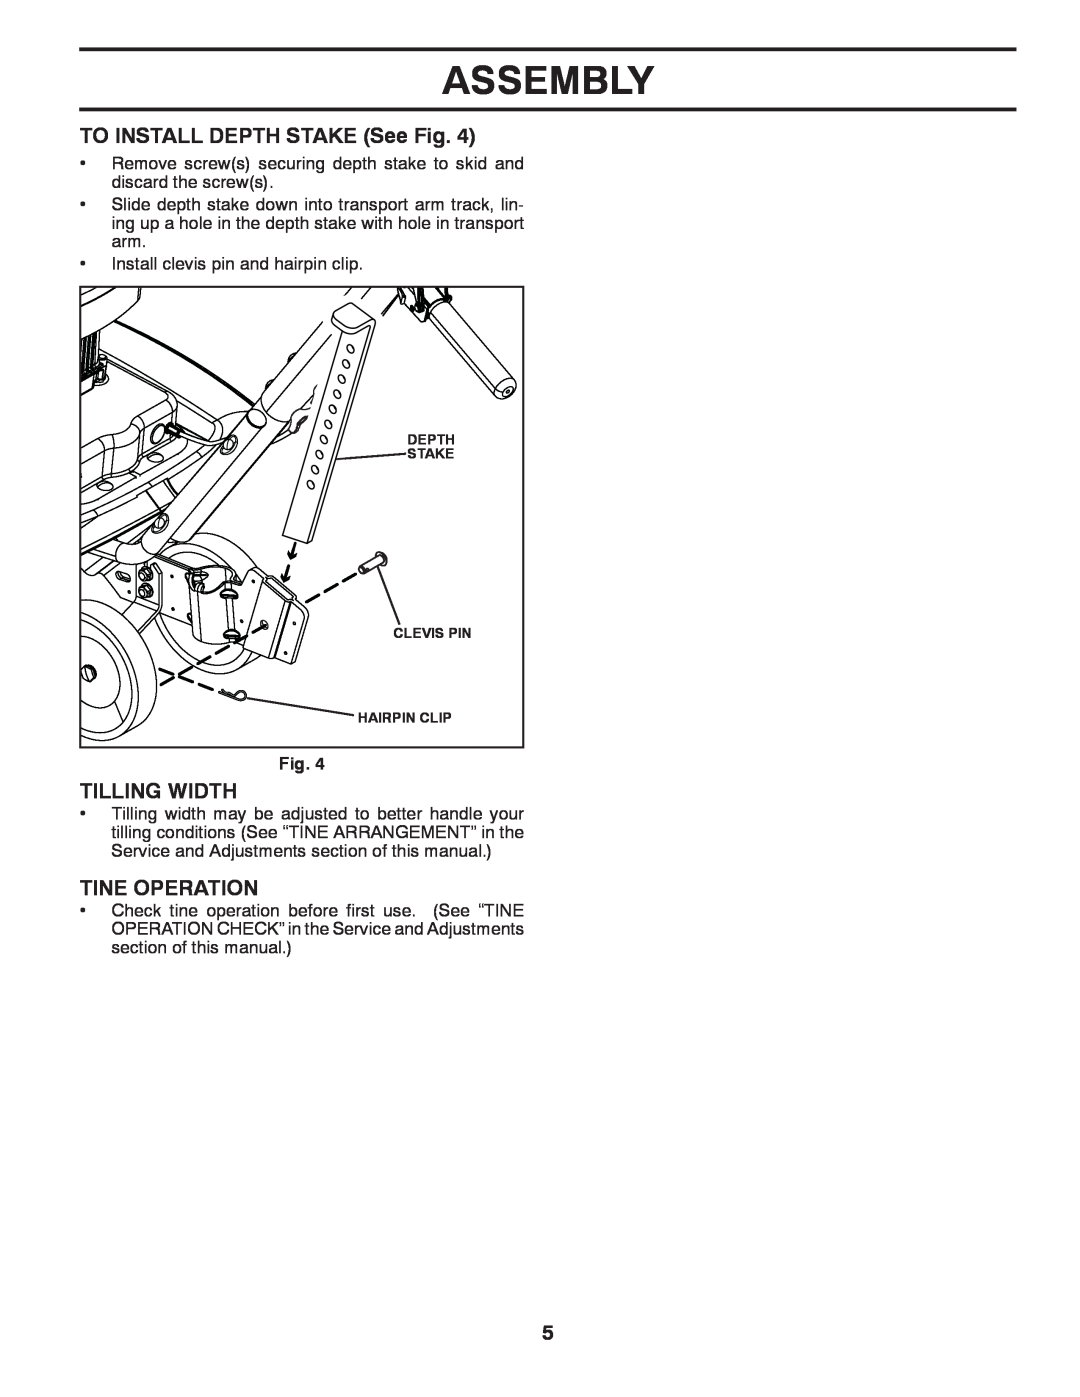 McCulloch 96083000300, 433691, MC550 manual TO INSTALL DEPTH STAKE See Fig, Tilling Width, Tine Operation, Assembly 